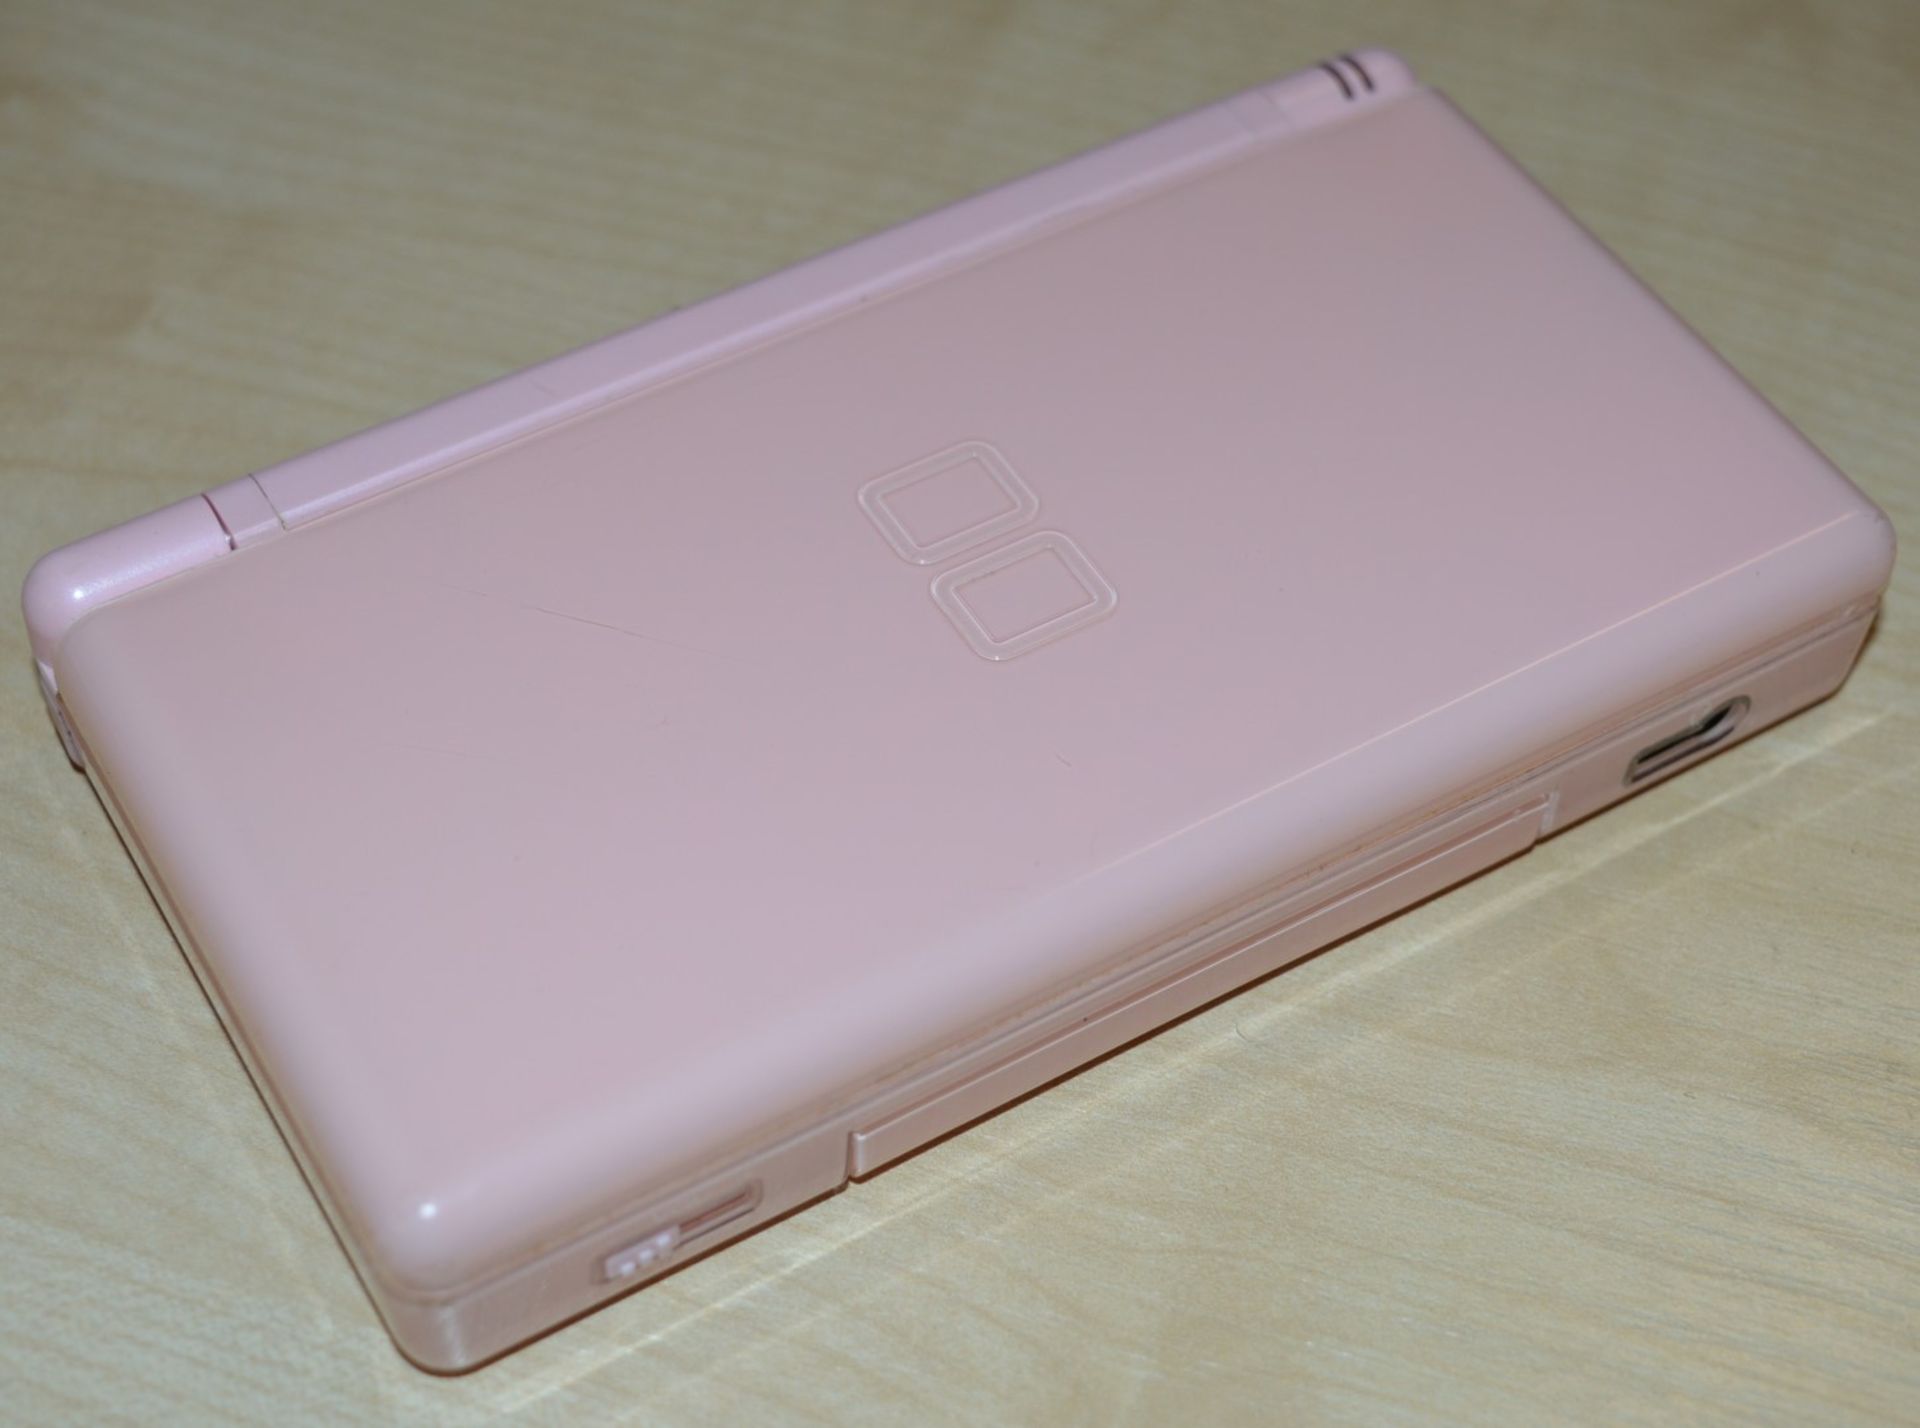 1 x Pink Nintendo DS Lite With High School Musical 2 Game - Includes Touch Pen and Charger - Good - Image 7 of 8